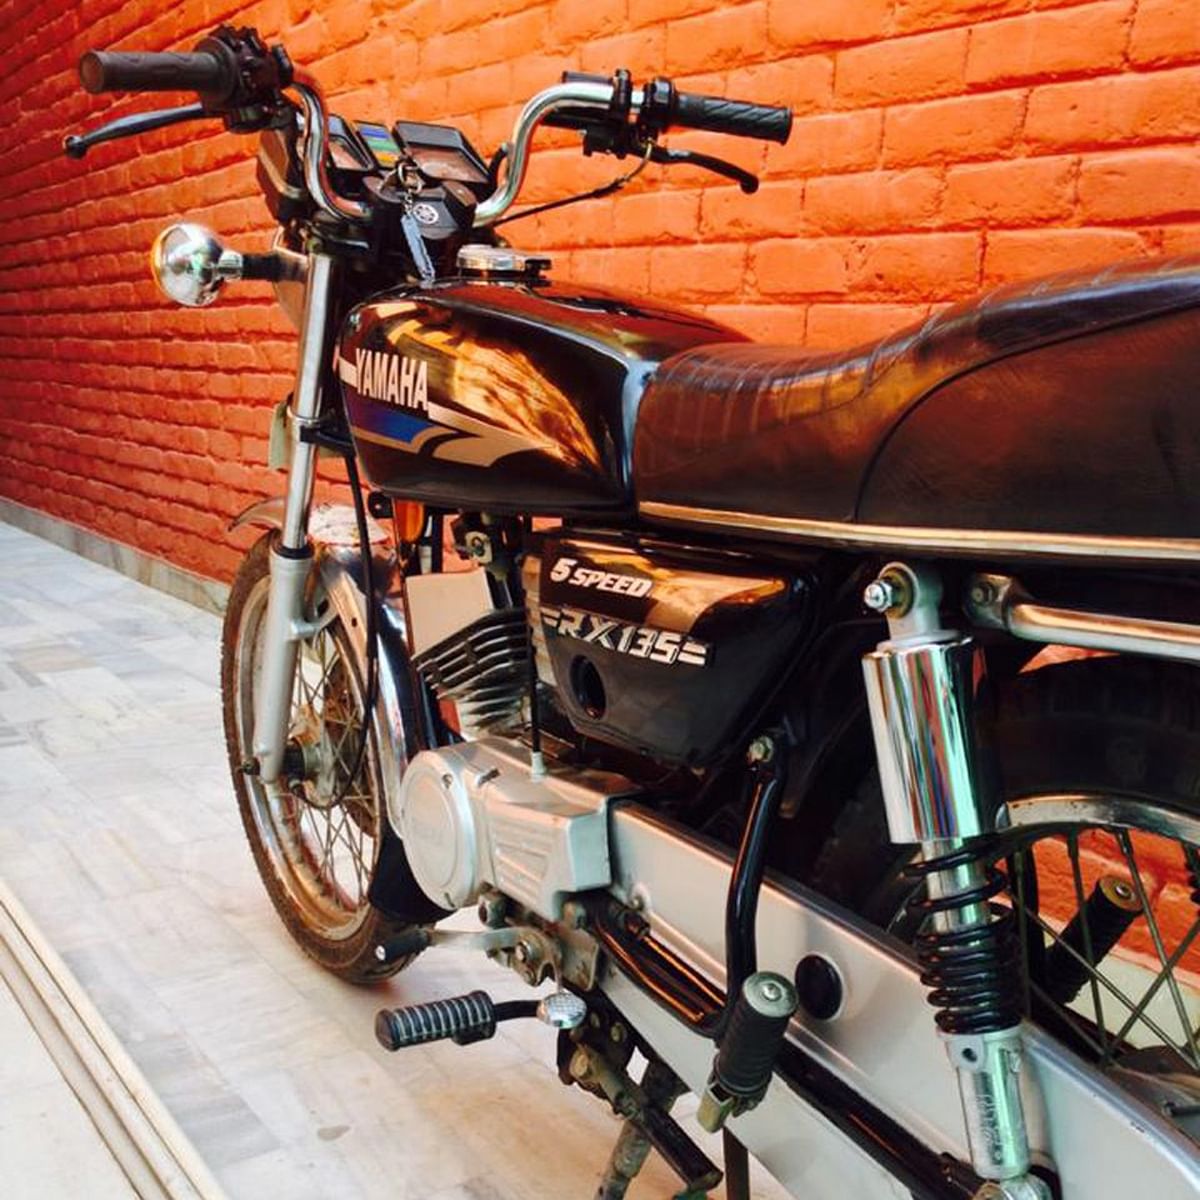 Here’s part 2 of how a two-stroke Yamaha RX135 changed Rahul Sharma’s life.